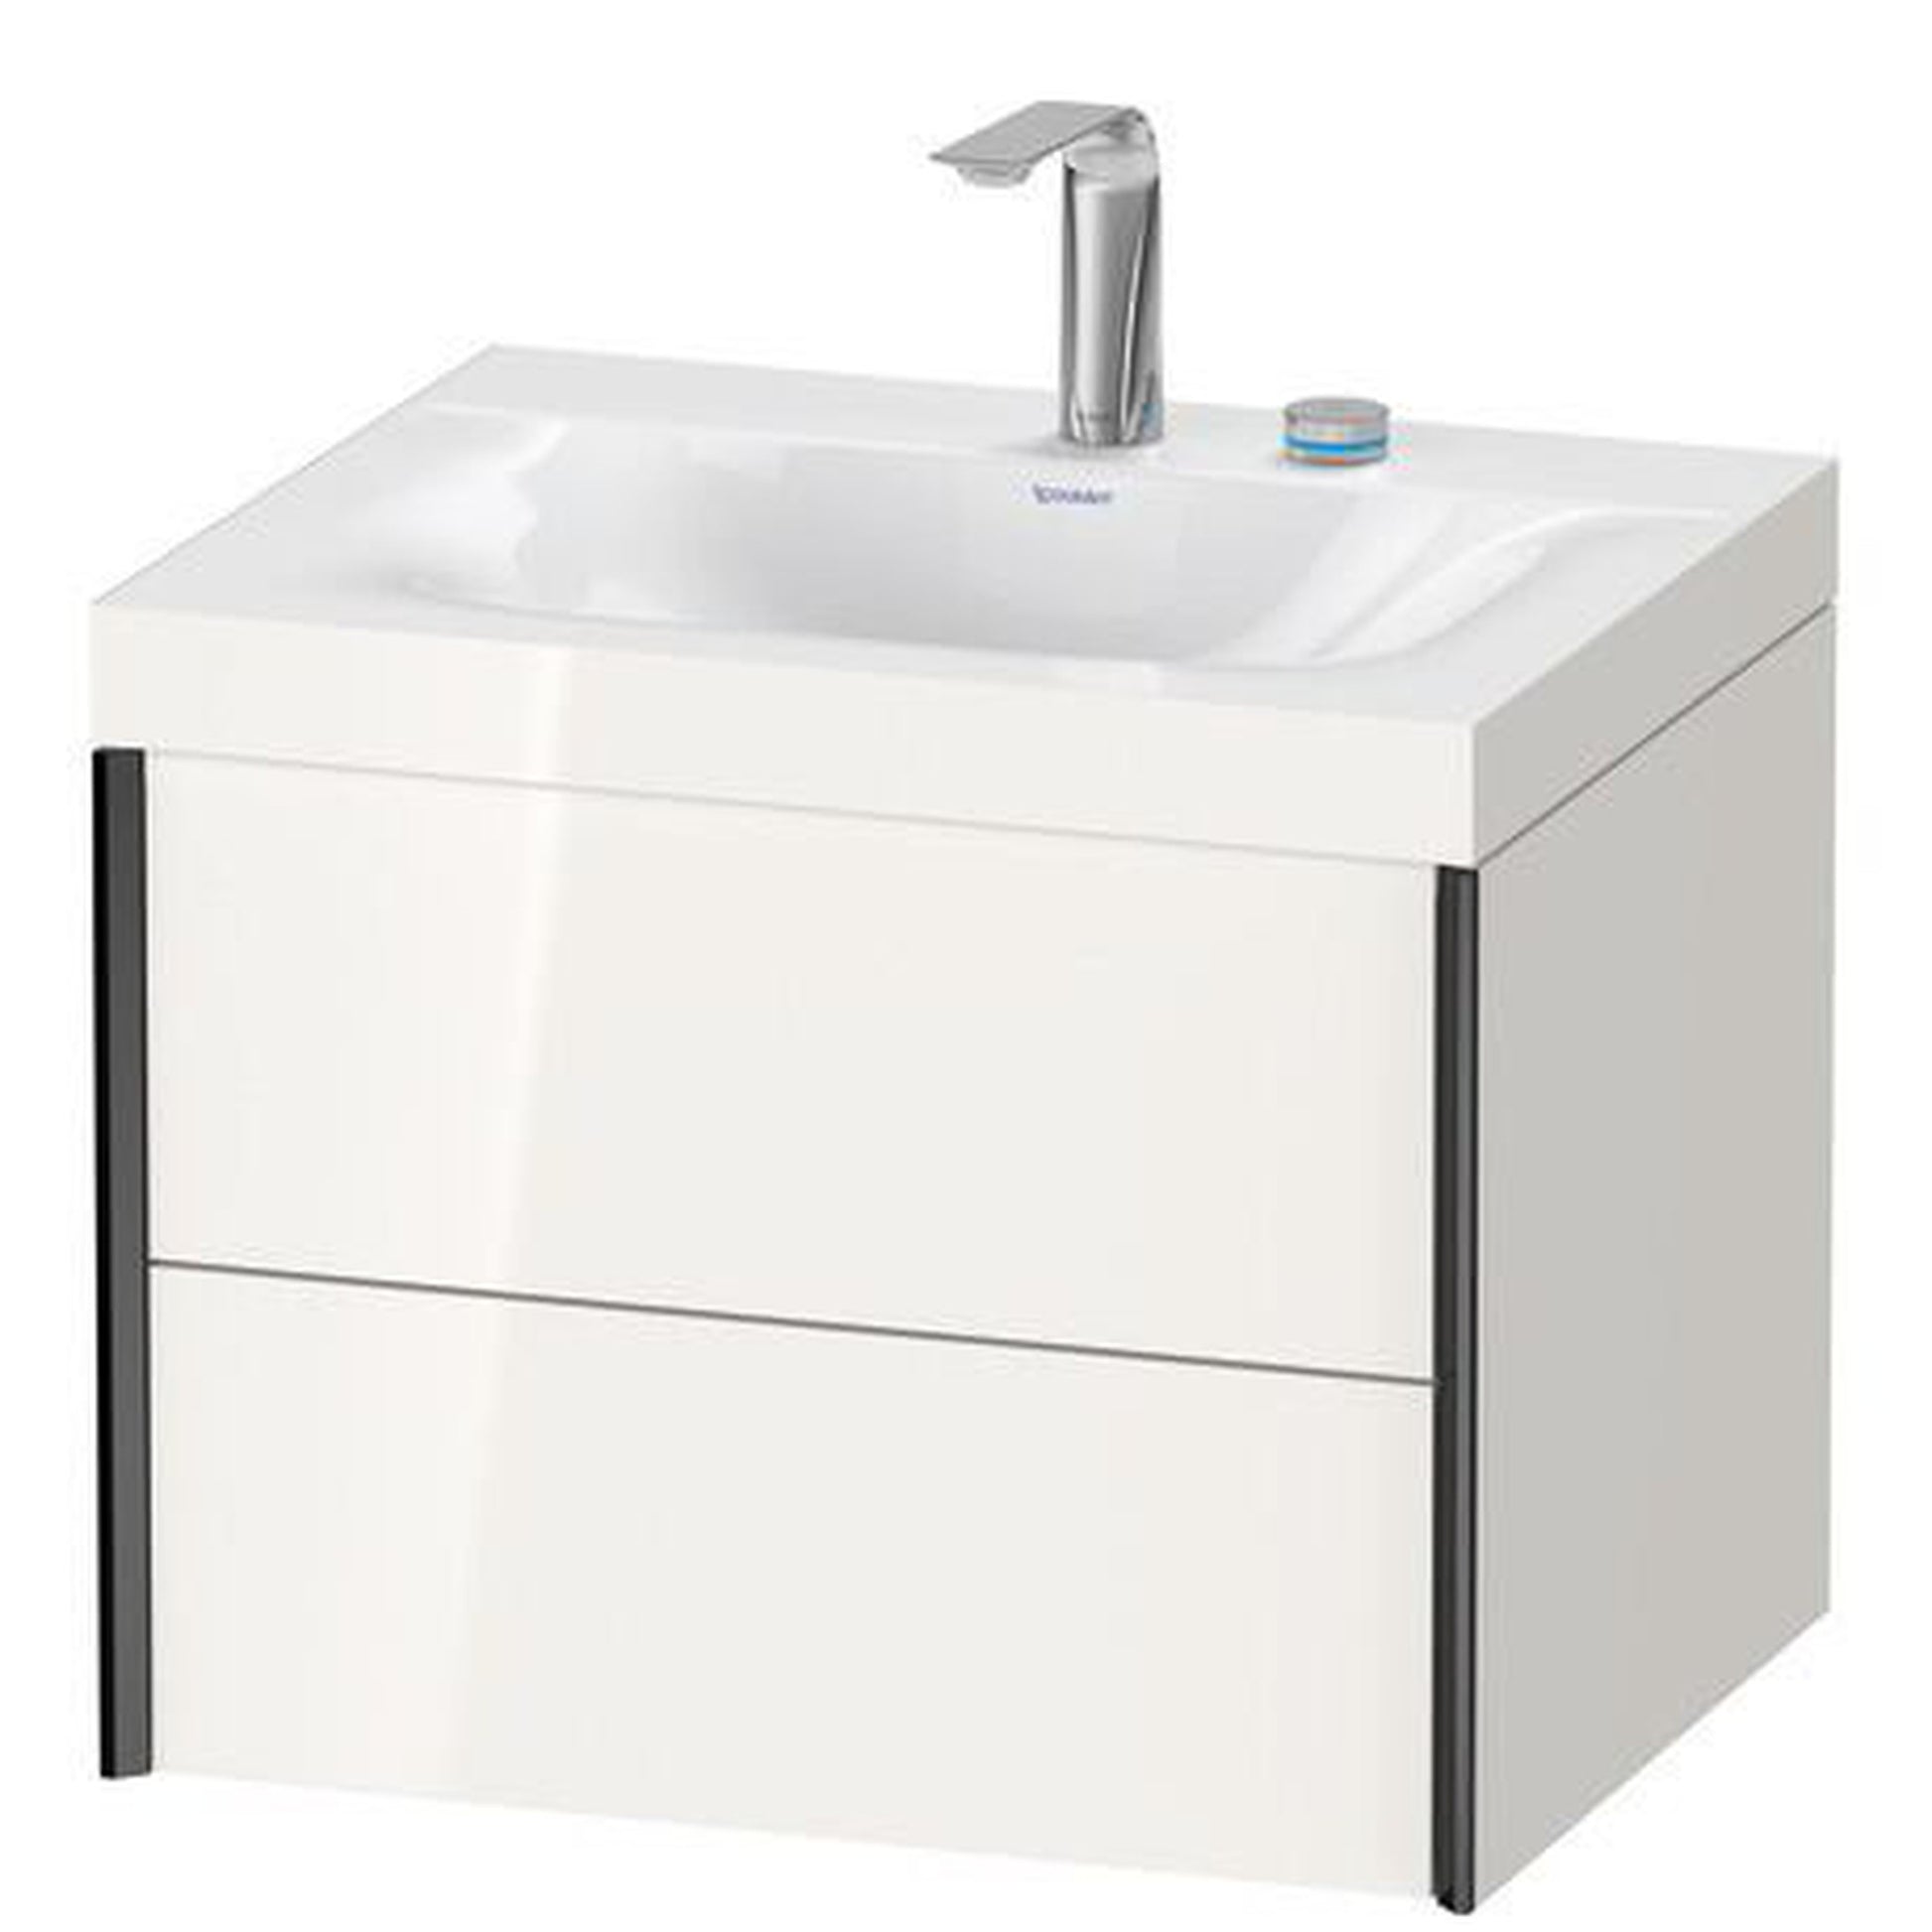 Duravit Xviu 24" x 20" x 19" Two Drawer C-Bonded Wall-Mount Vanity Kit With Two Tap Holes, White (XV4614EB222C)